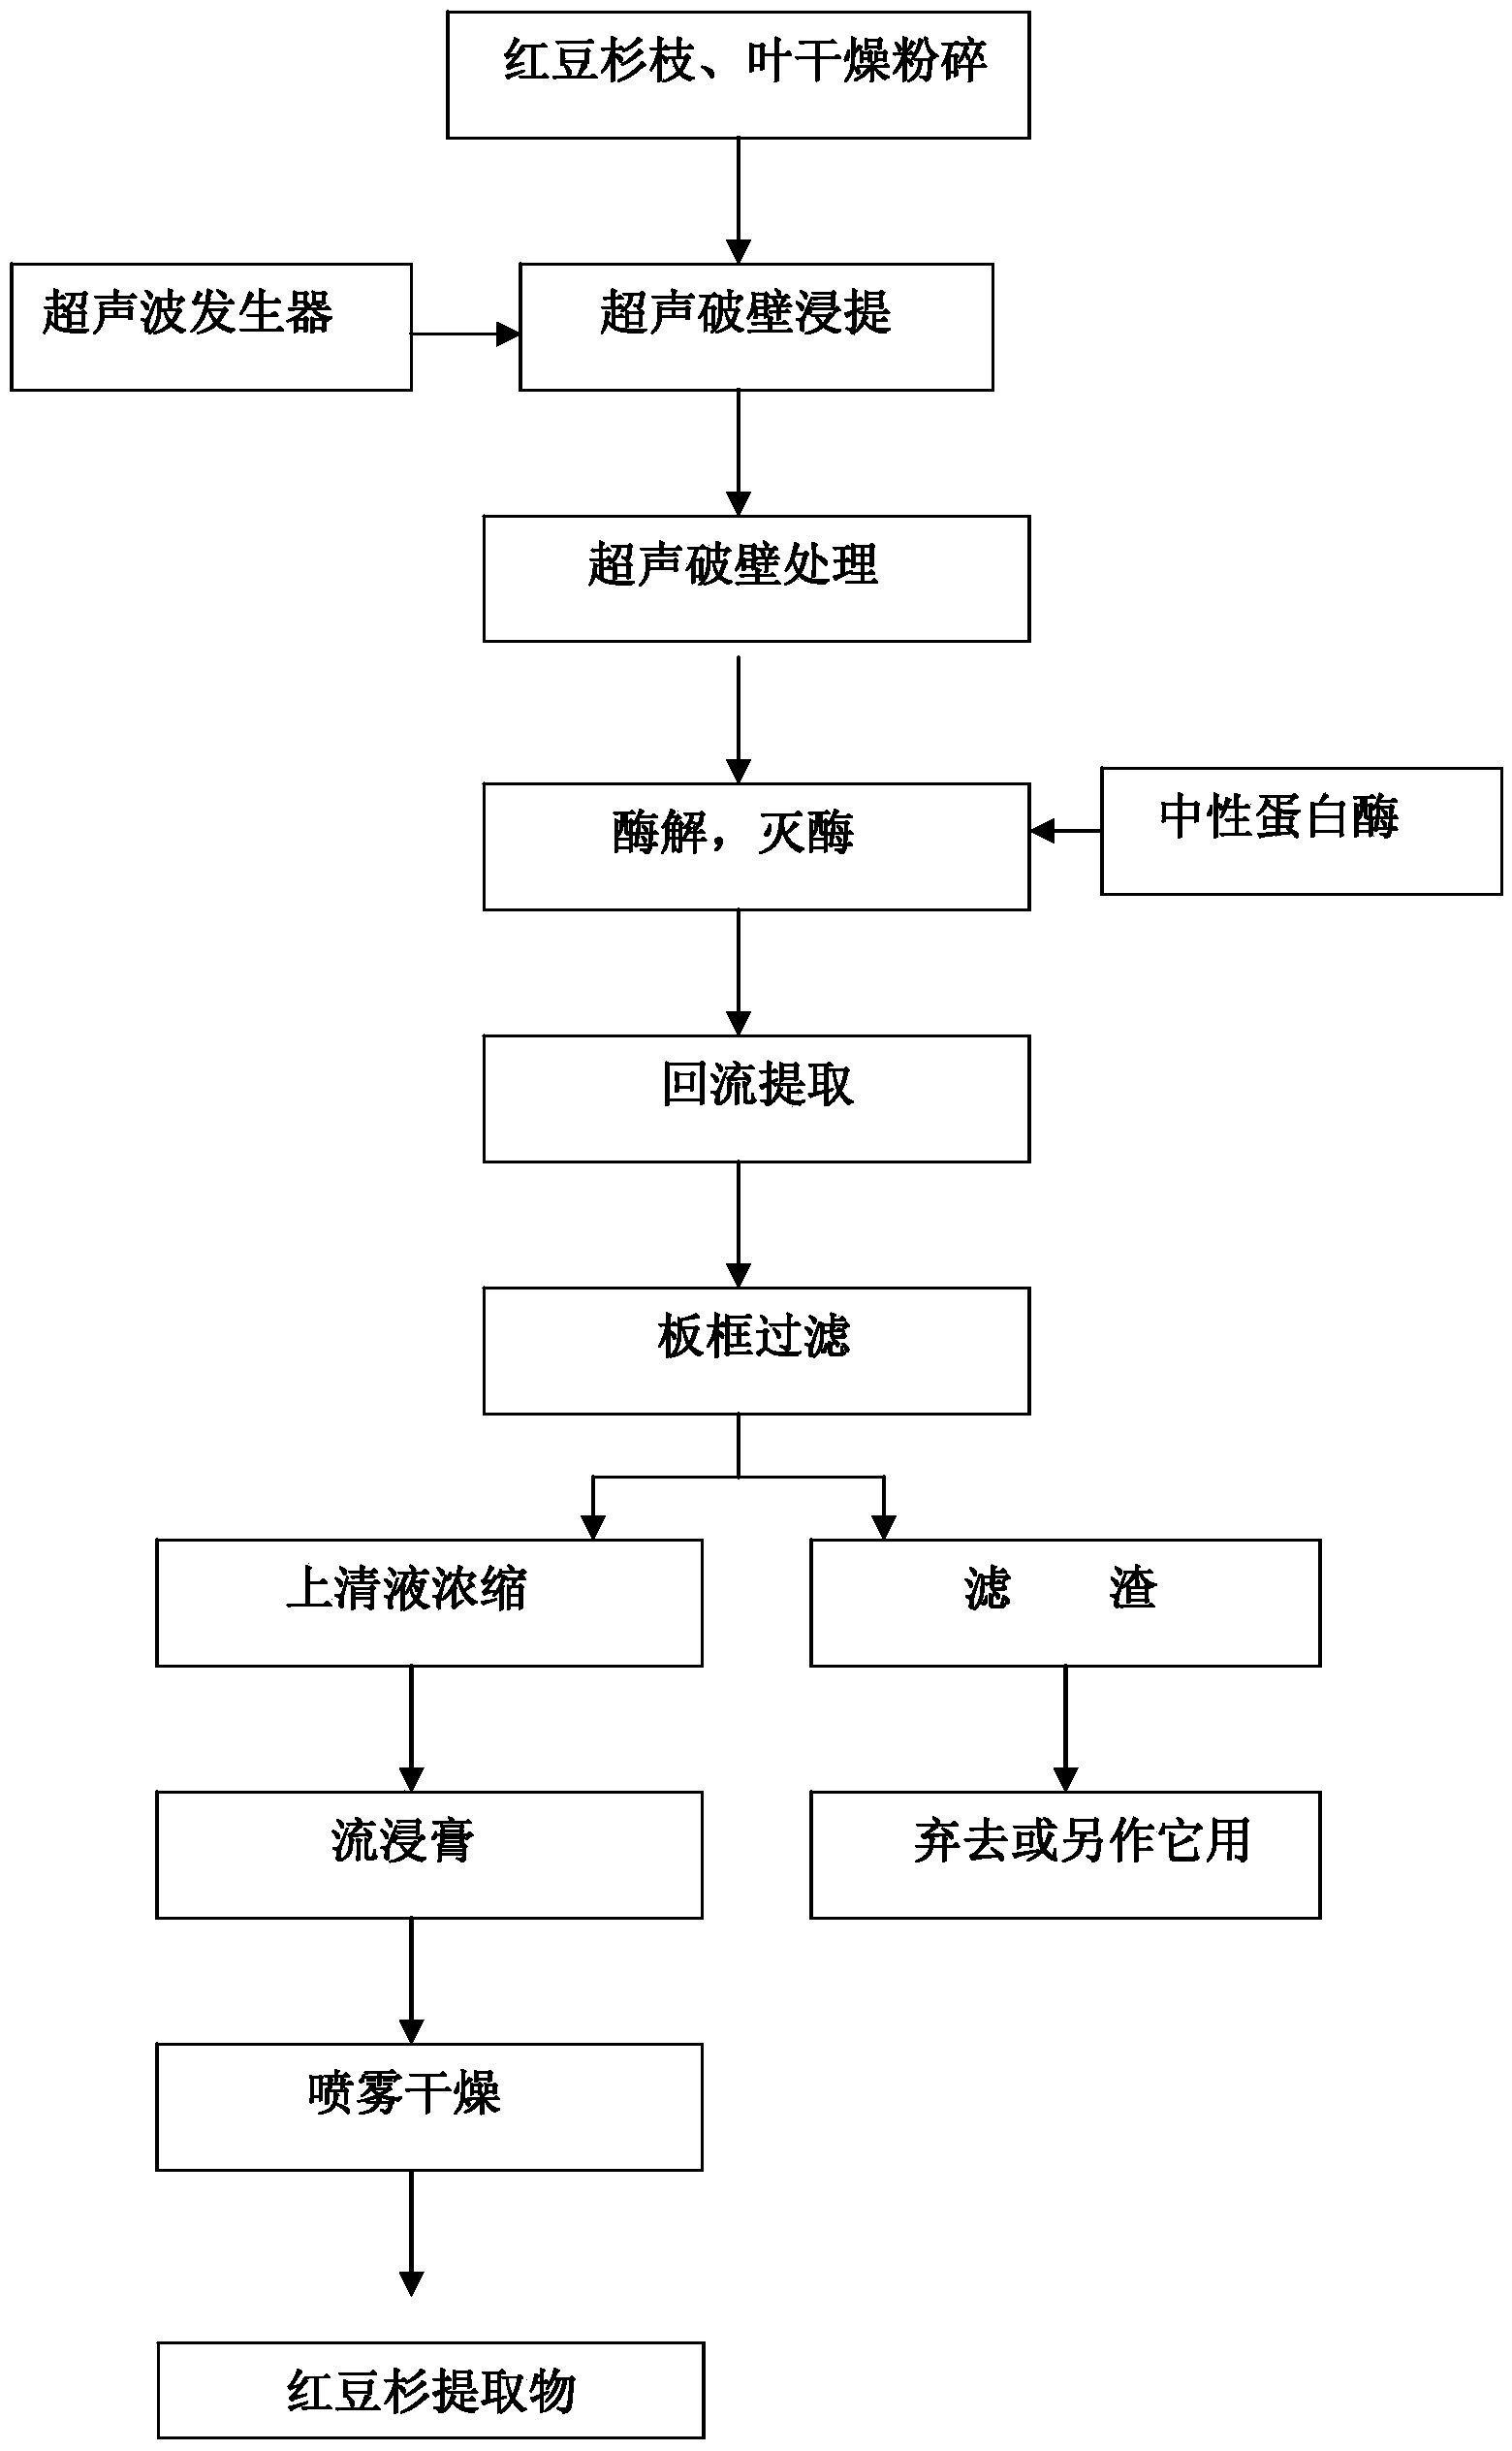 Preparation method for taxus chinensis extractive and application of taxus chinensis extractive